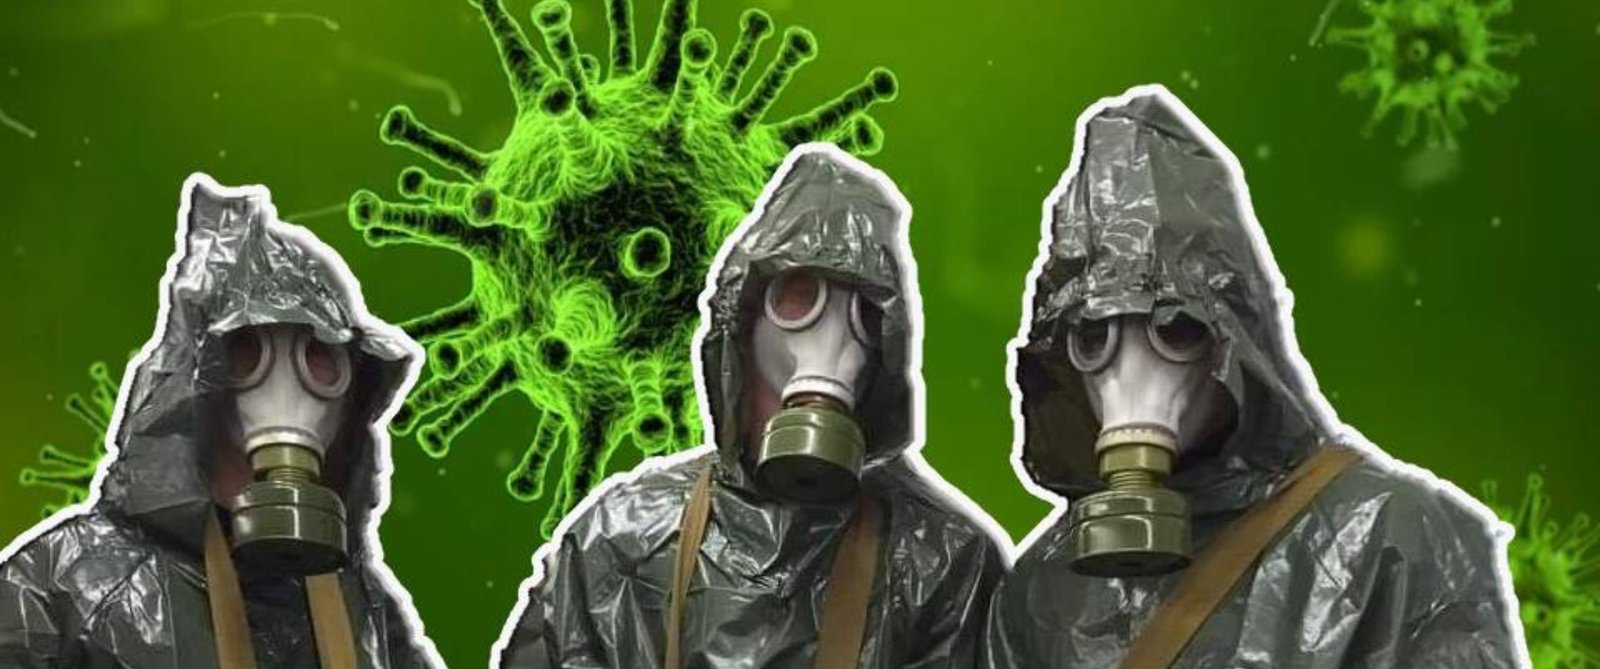 Does gp5 gas mask from ebay have asbestos? | Military Brothers